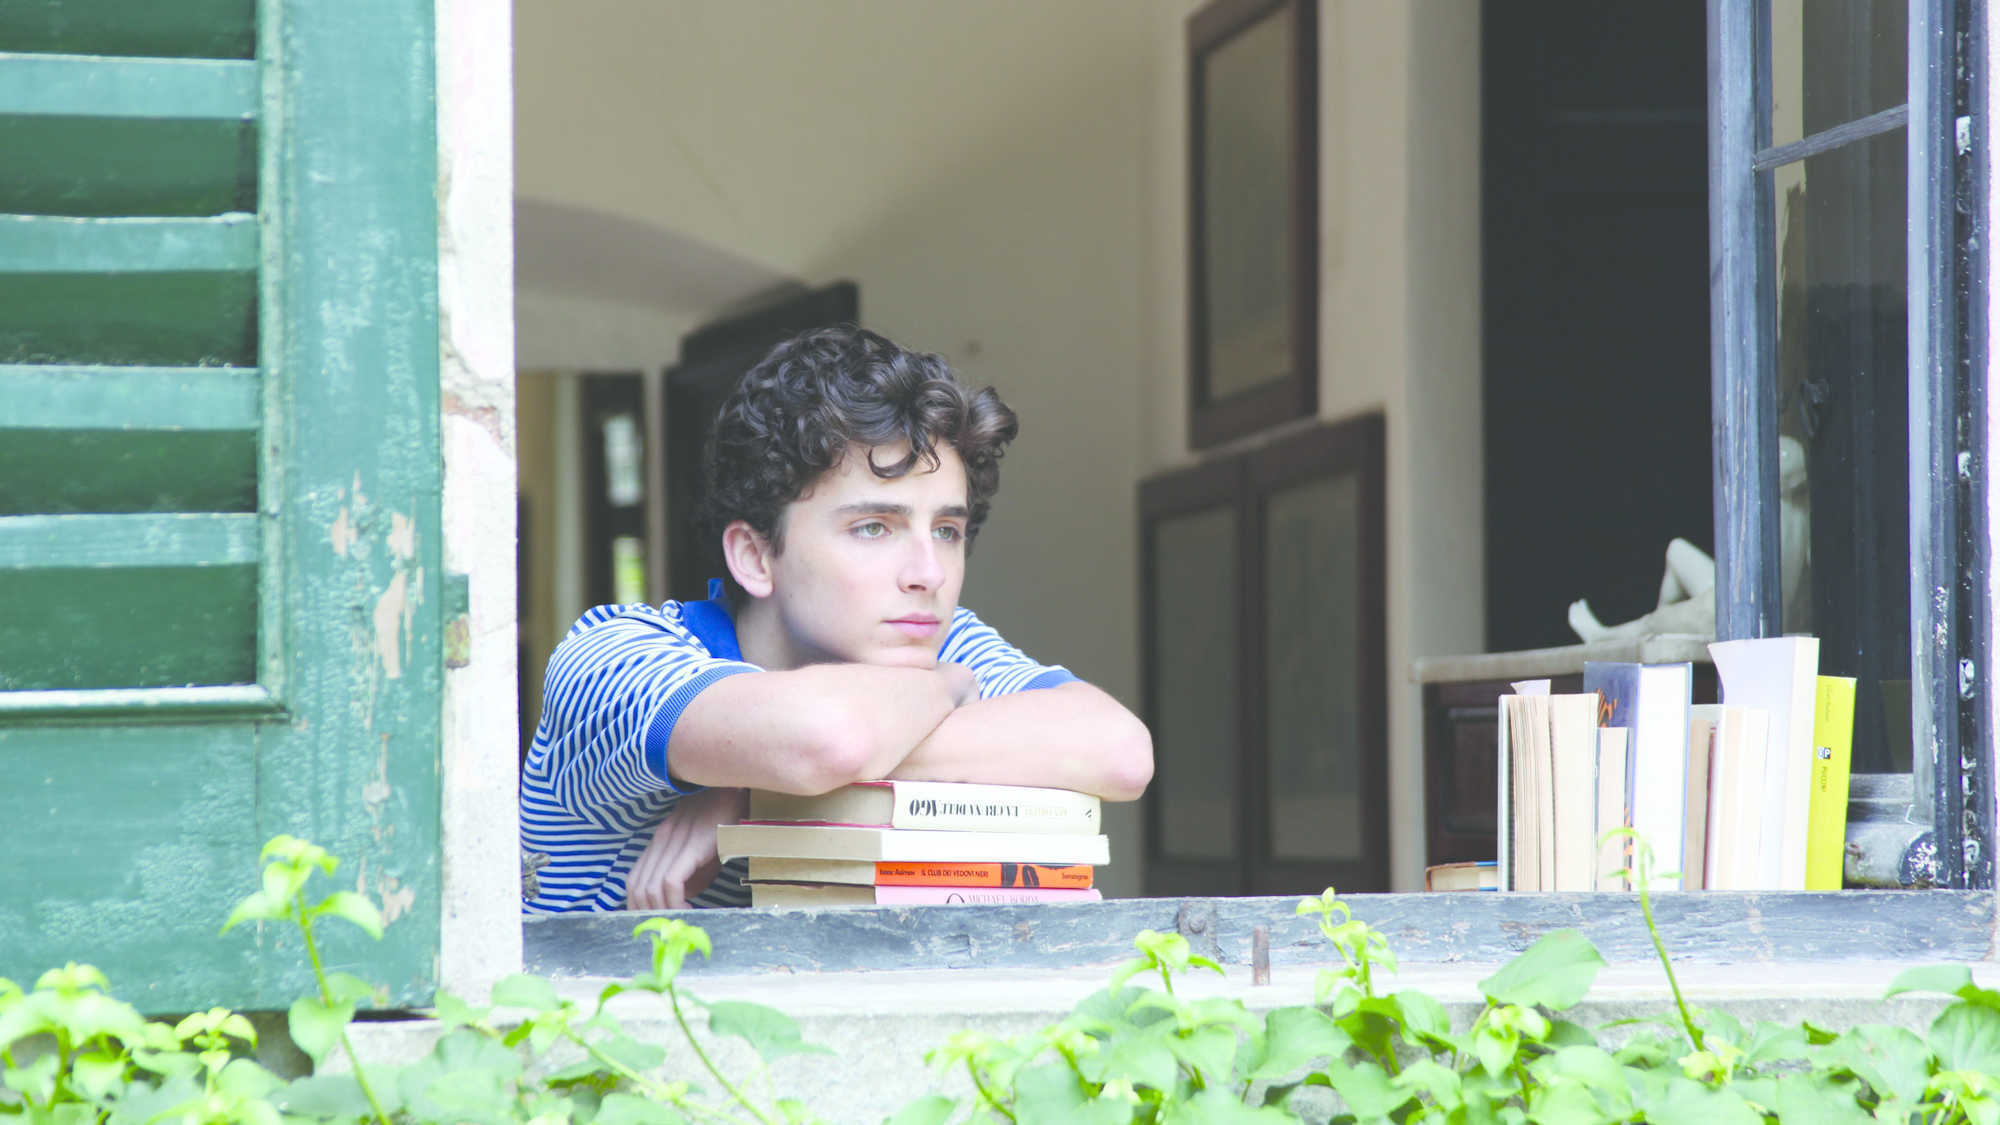 Call Me by Your Name Wallpaper Free Call Me